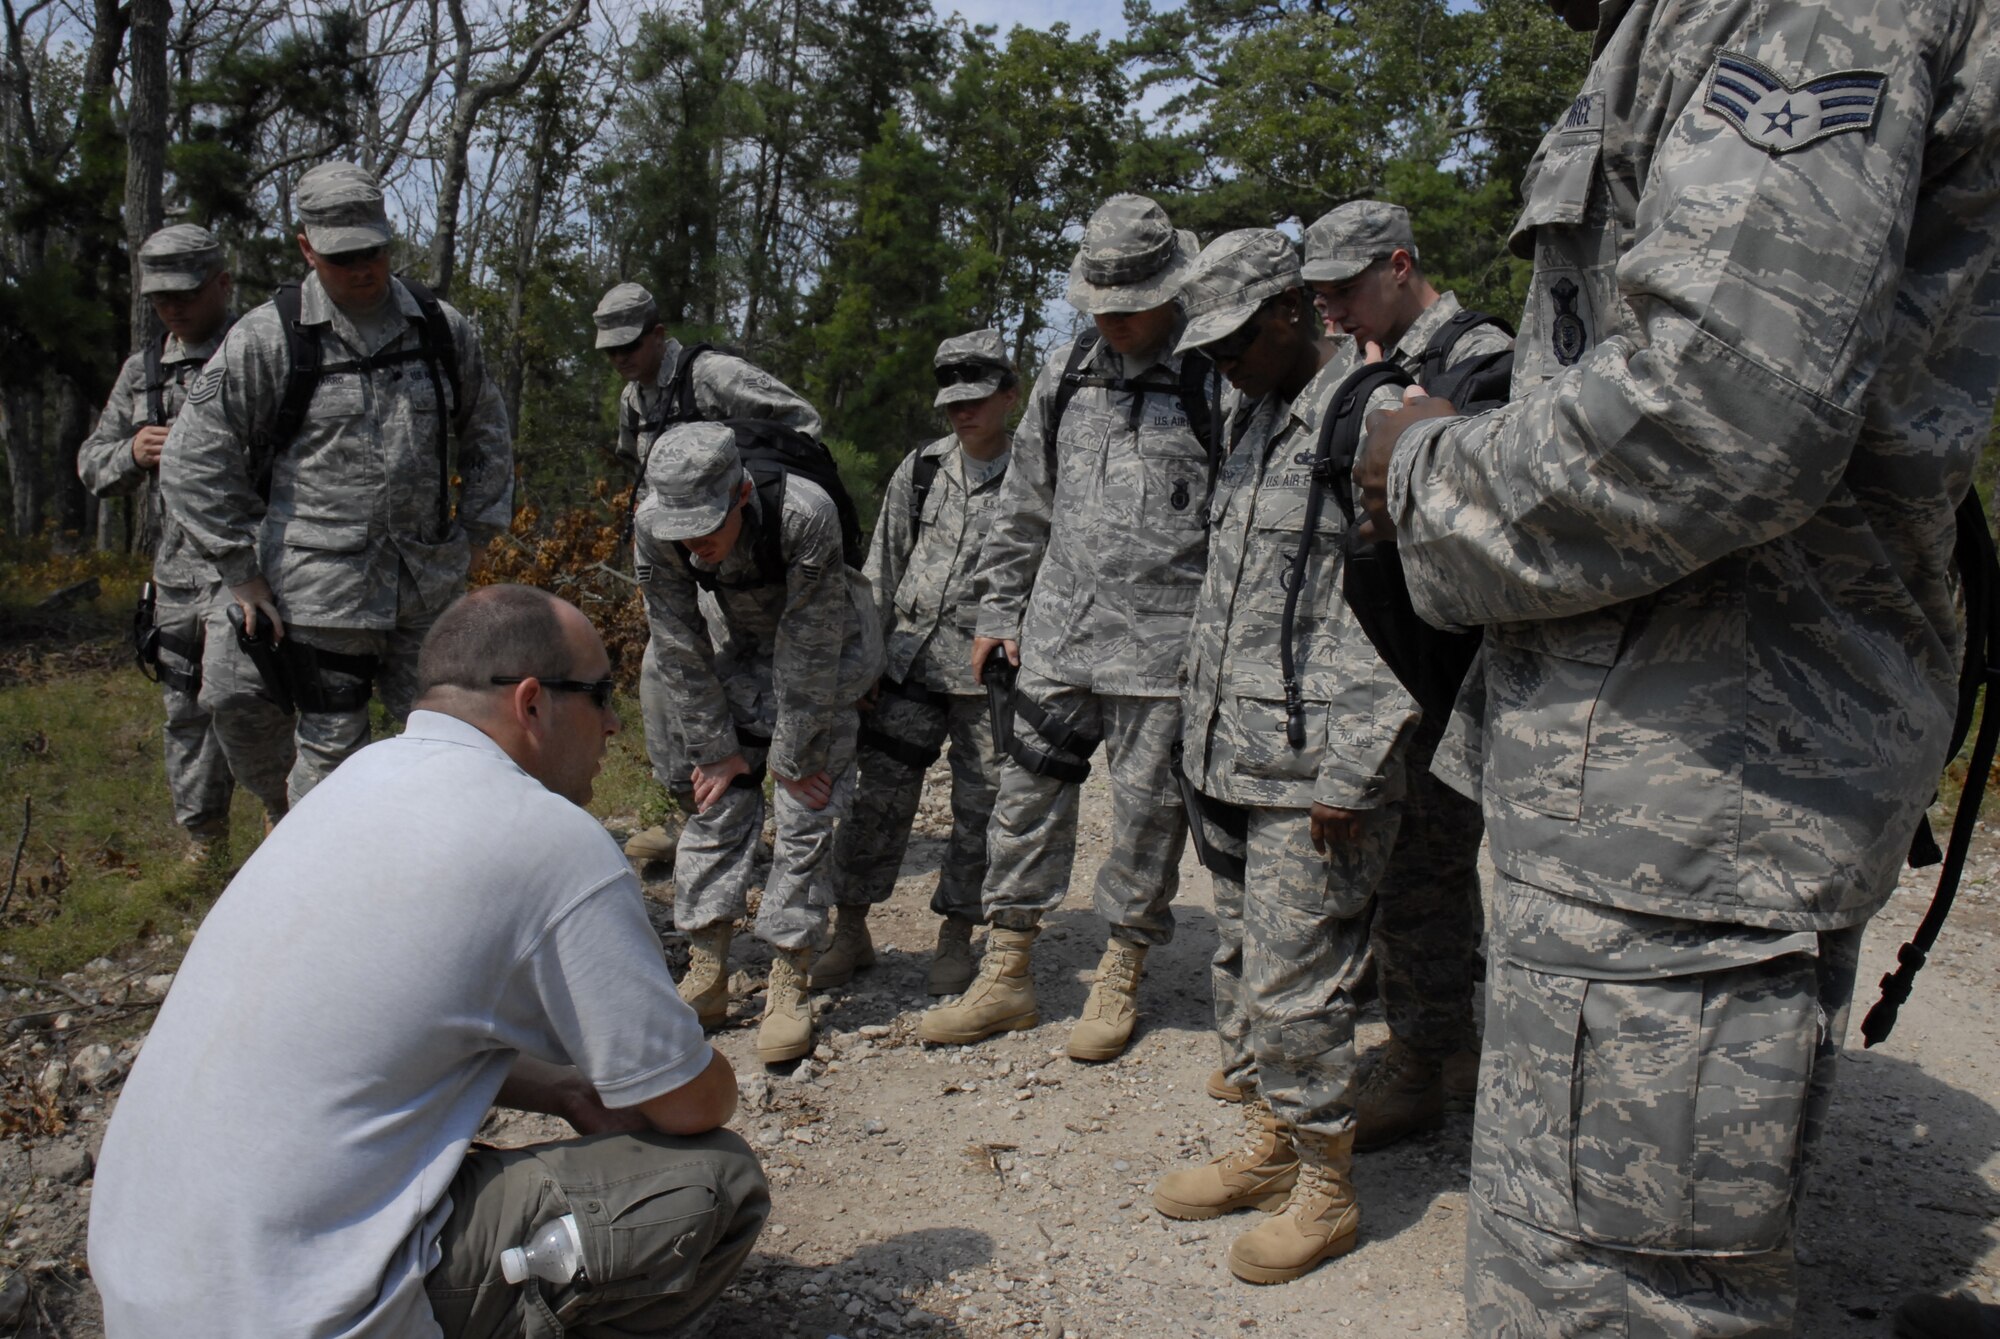 An EOD instructor, Mr. David Leventhal, shows security forces students what signs to look for that there is an IED placed on their convoy route during a training exercise on a Fort Dix range, August 26, 2009, conducted by the 421st Combat Training Squadron hosted by the U.S. Air Force Expeditionary Center, Joint Base McGuire-Dix-Lakehurst, N.J. (U.S. Air Force Photo/Tech. Sgt. Paul R. Evans)